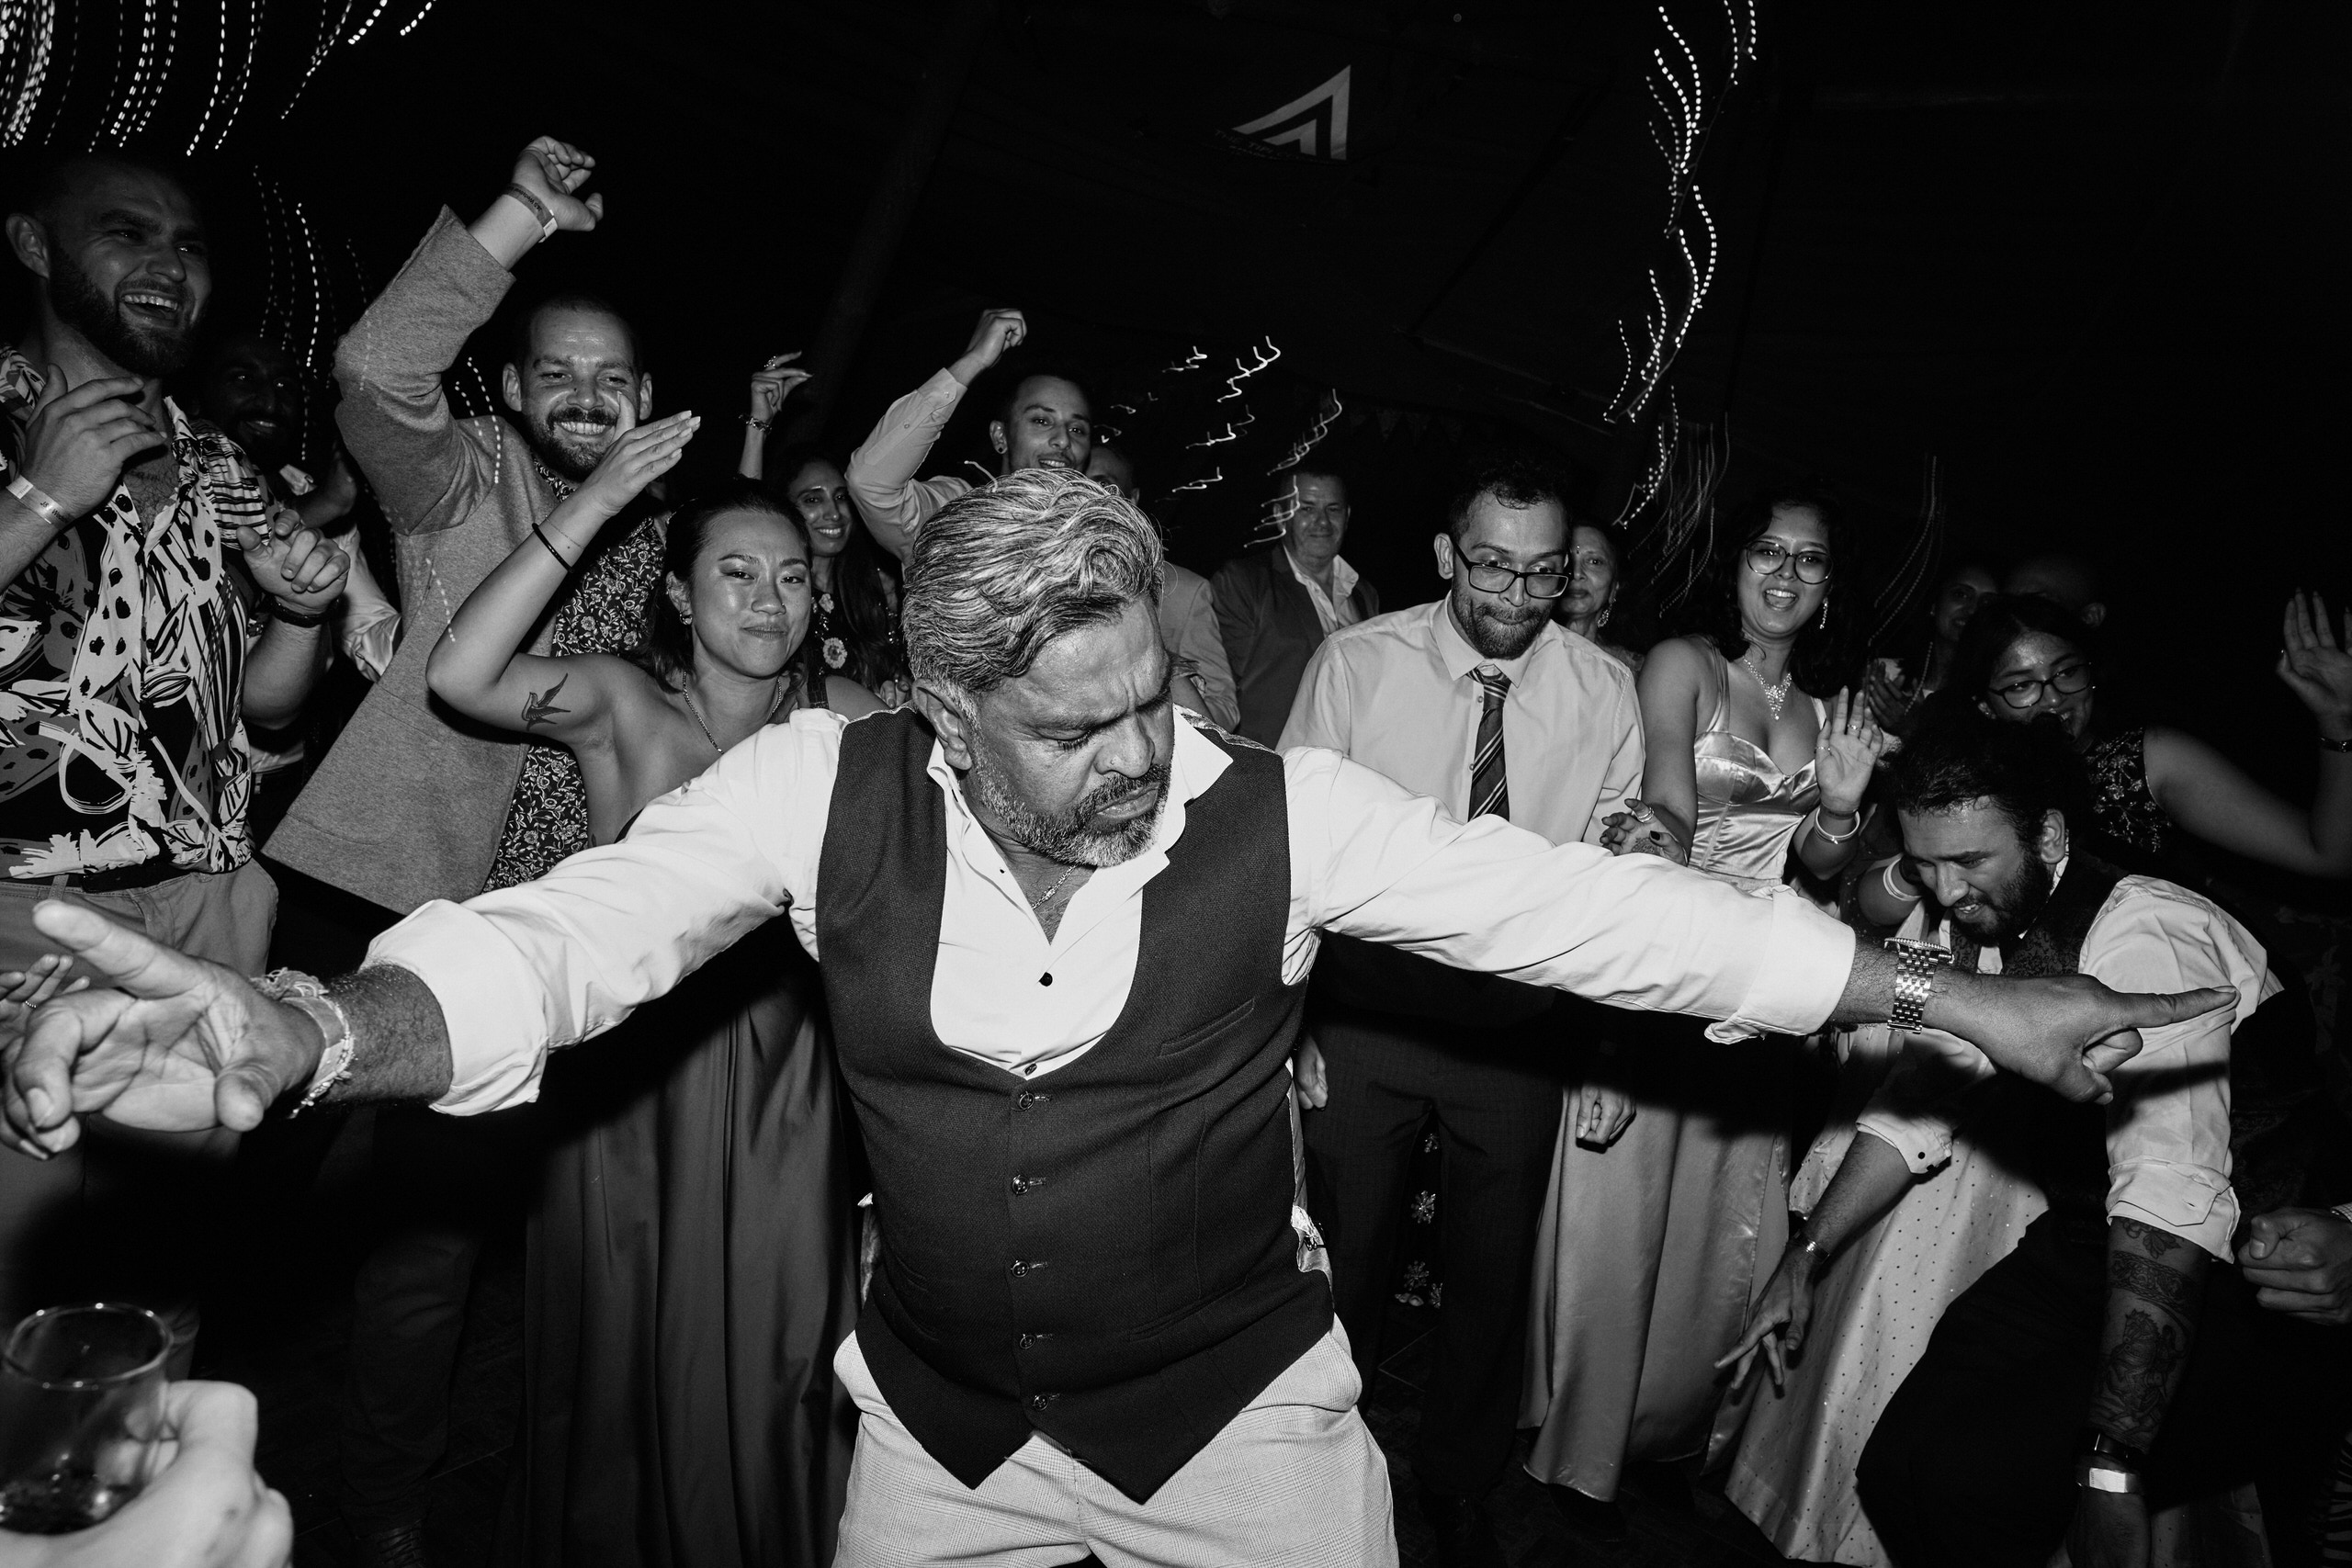 A guy busting a move on the dance floor at a party.